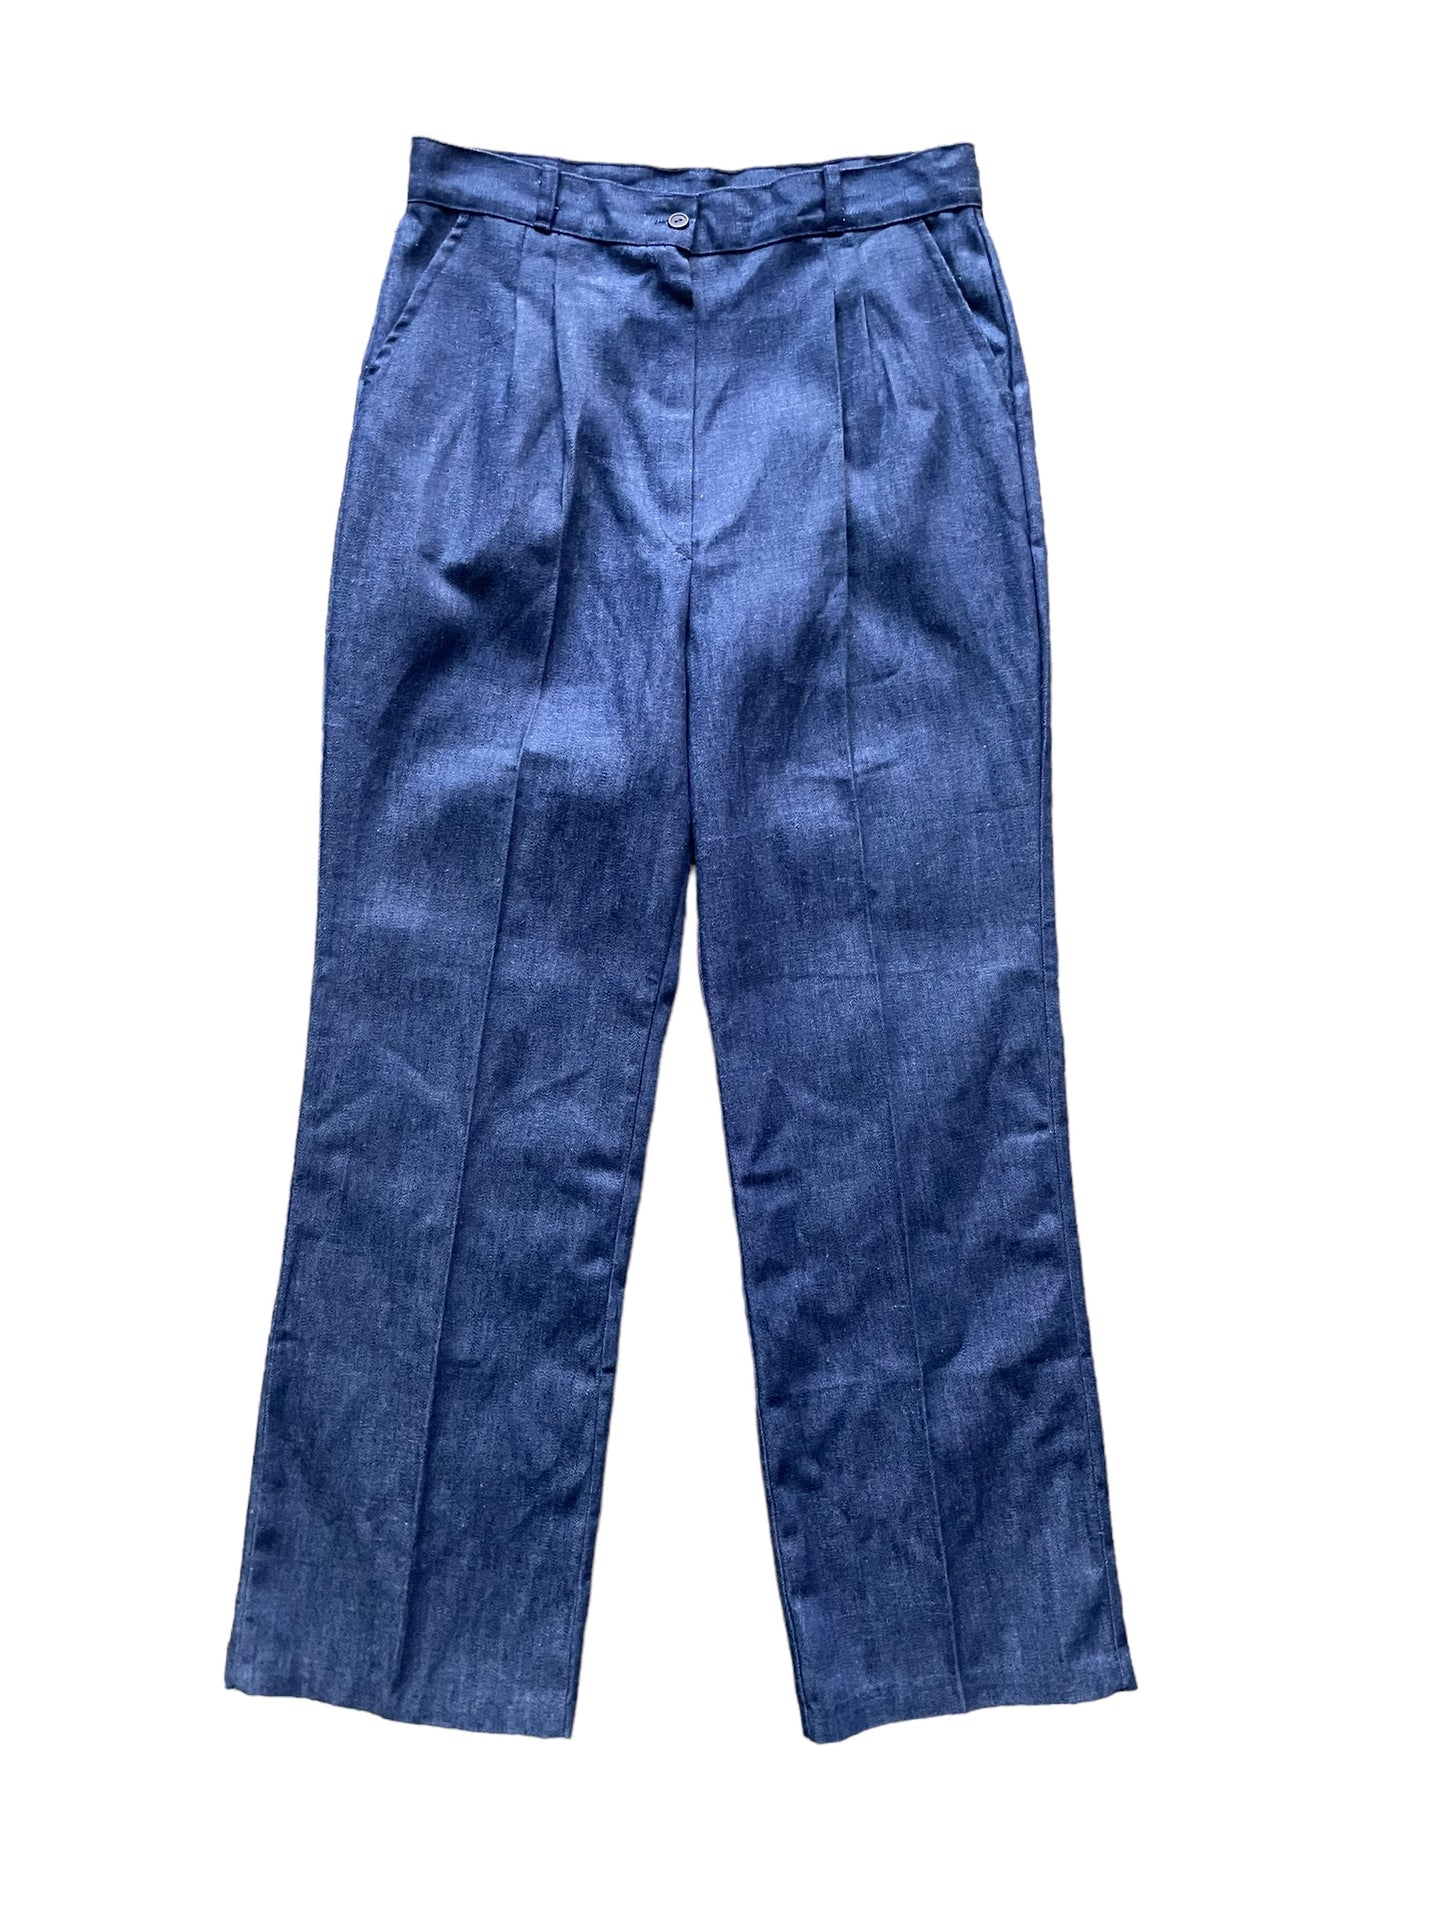 Full front view of Vintage 1970s Mork and Mindy Denim Trousers W32 | Barn Owl Vintage Seattle | Vintage Denim